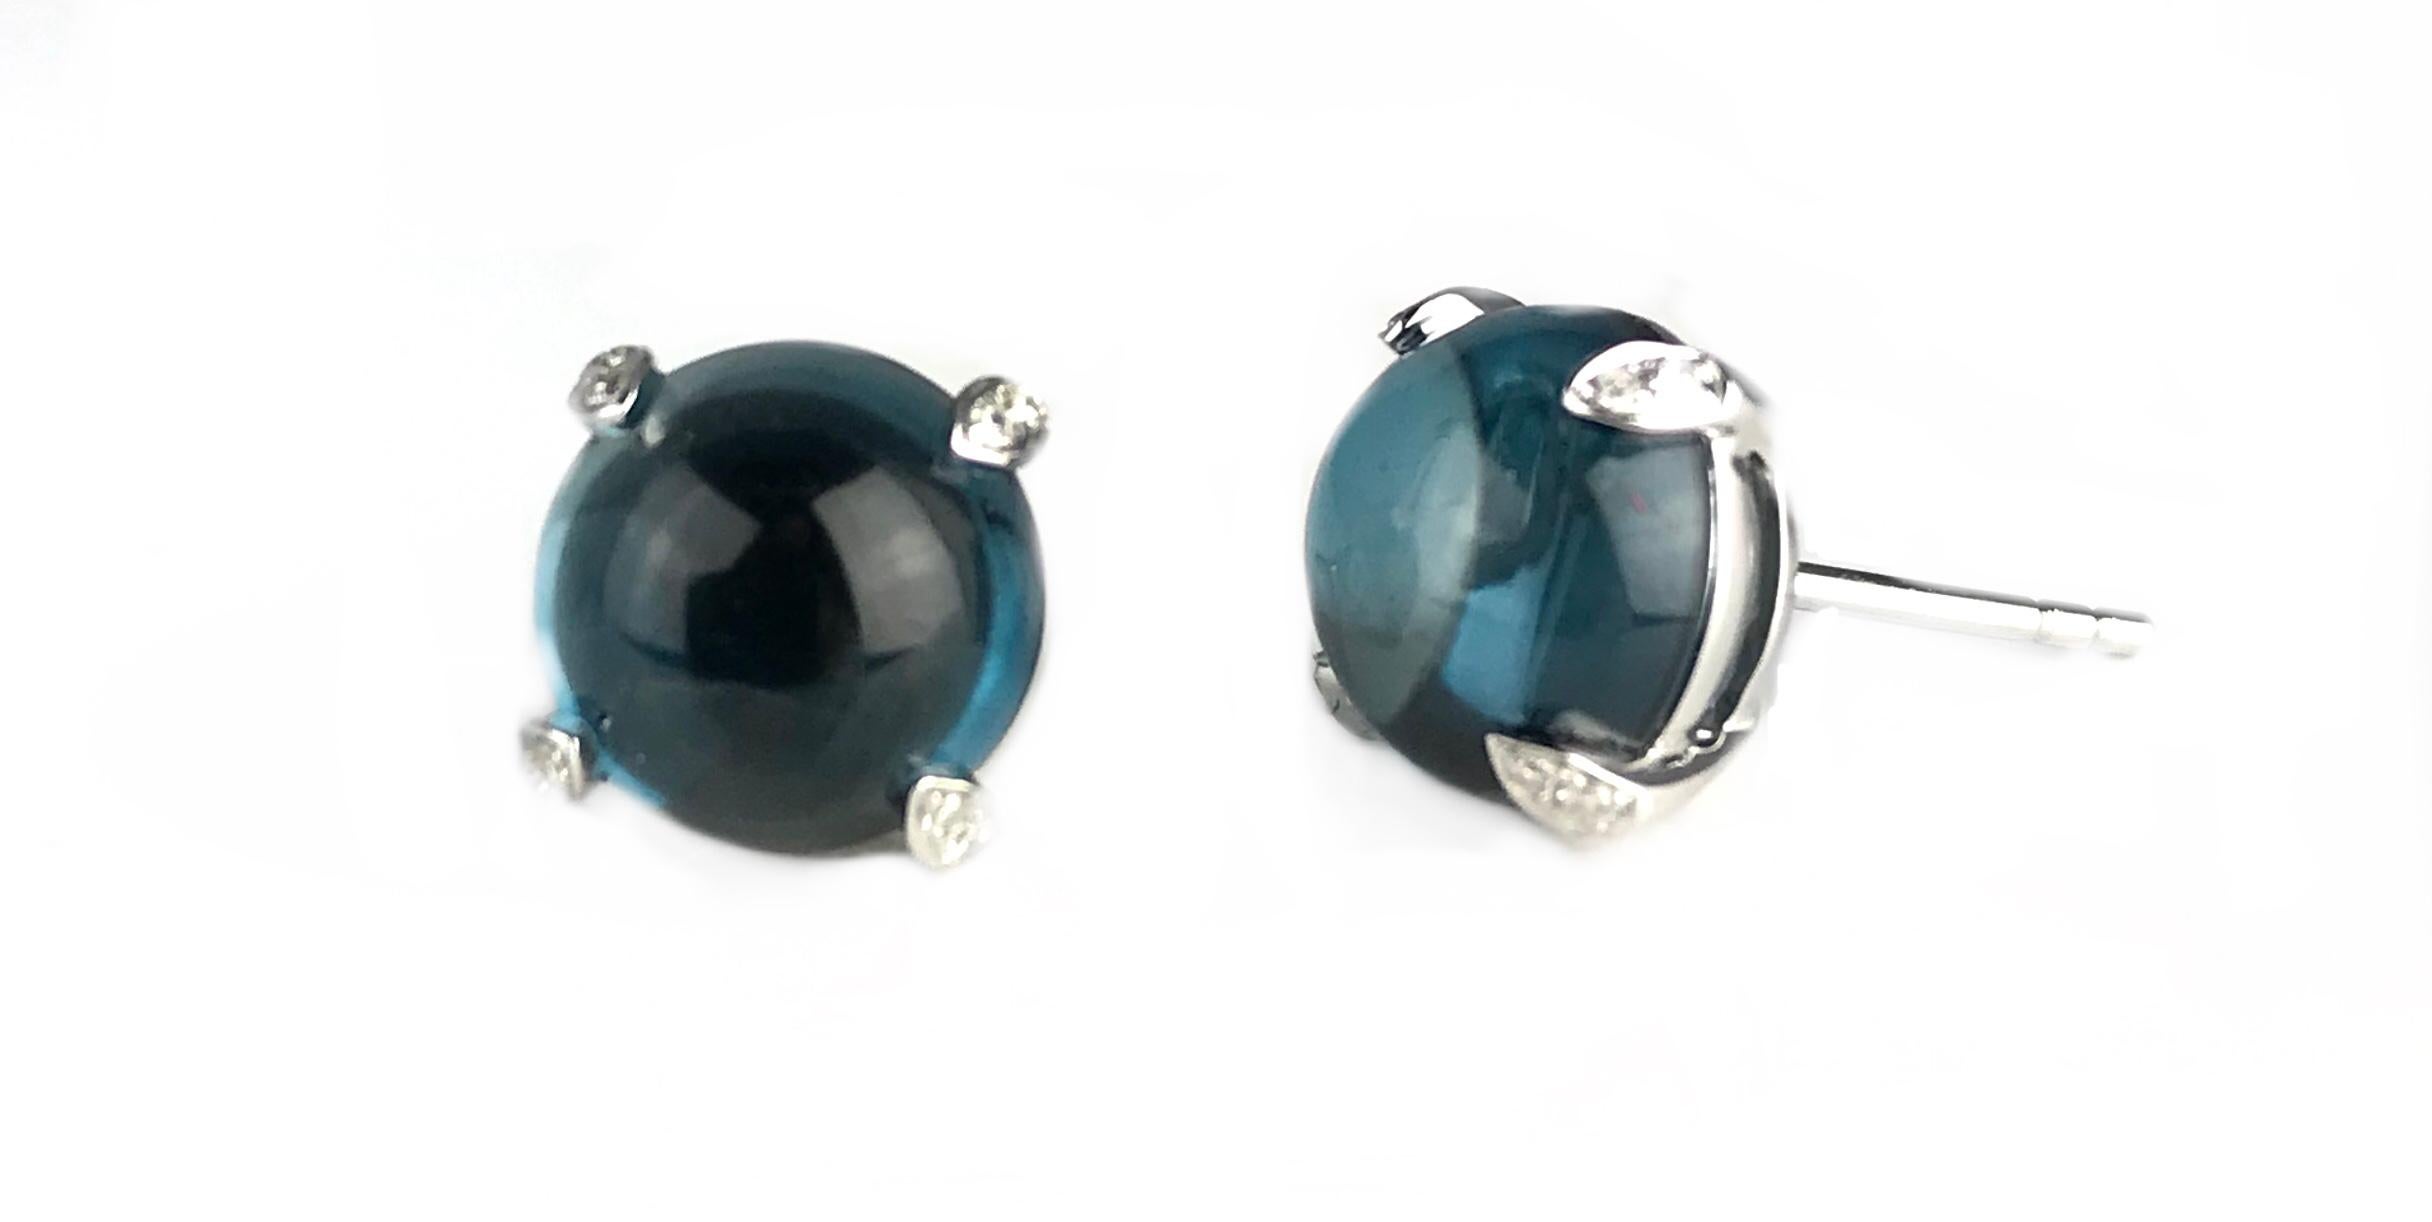 These beautiful earrings feature 7.86 carats cabochon blue topaz. The prongs are embellished with 0.06 carats diamonds.

Set in 14k white gold, these earrings would be a welcome addition to any jewelry box.

Diamond Town is pleased to offer a